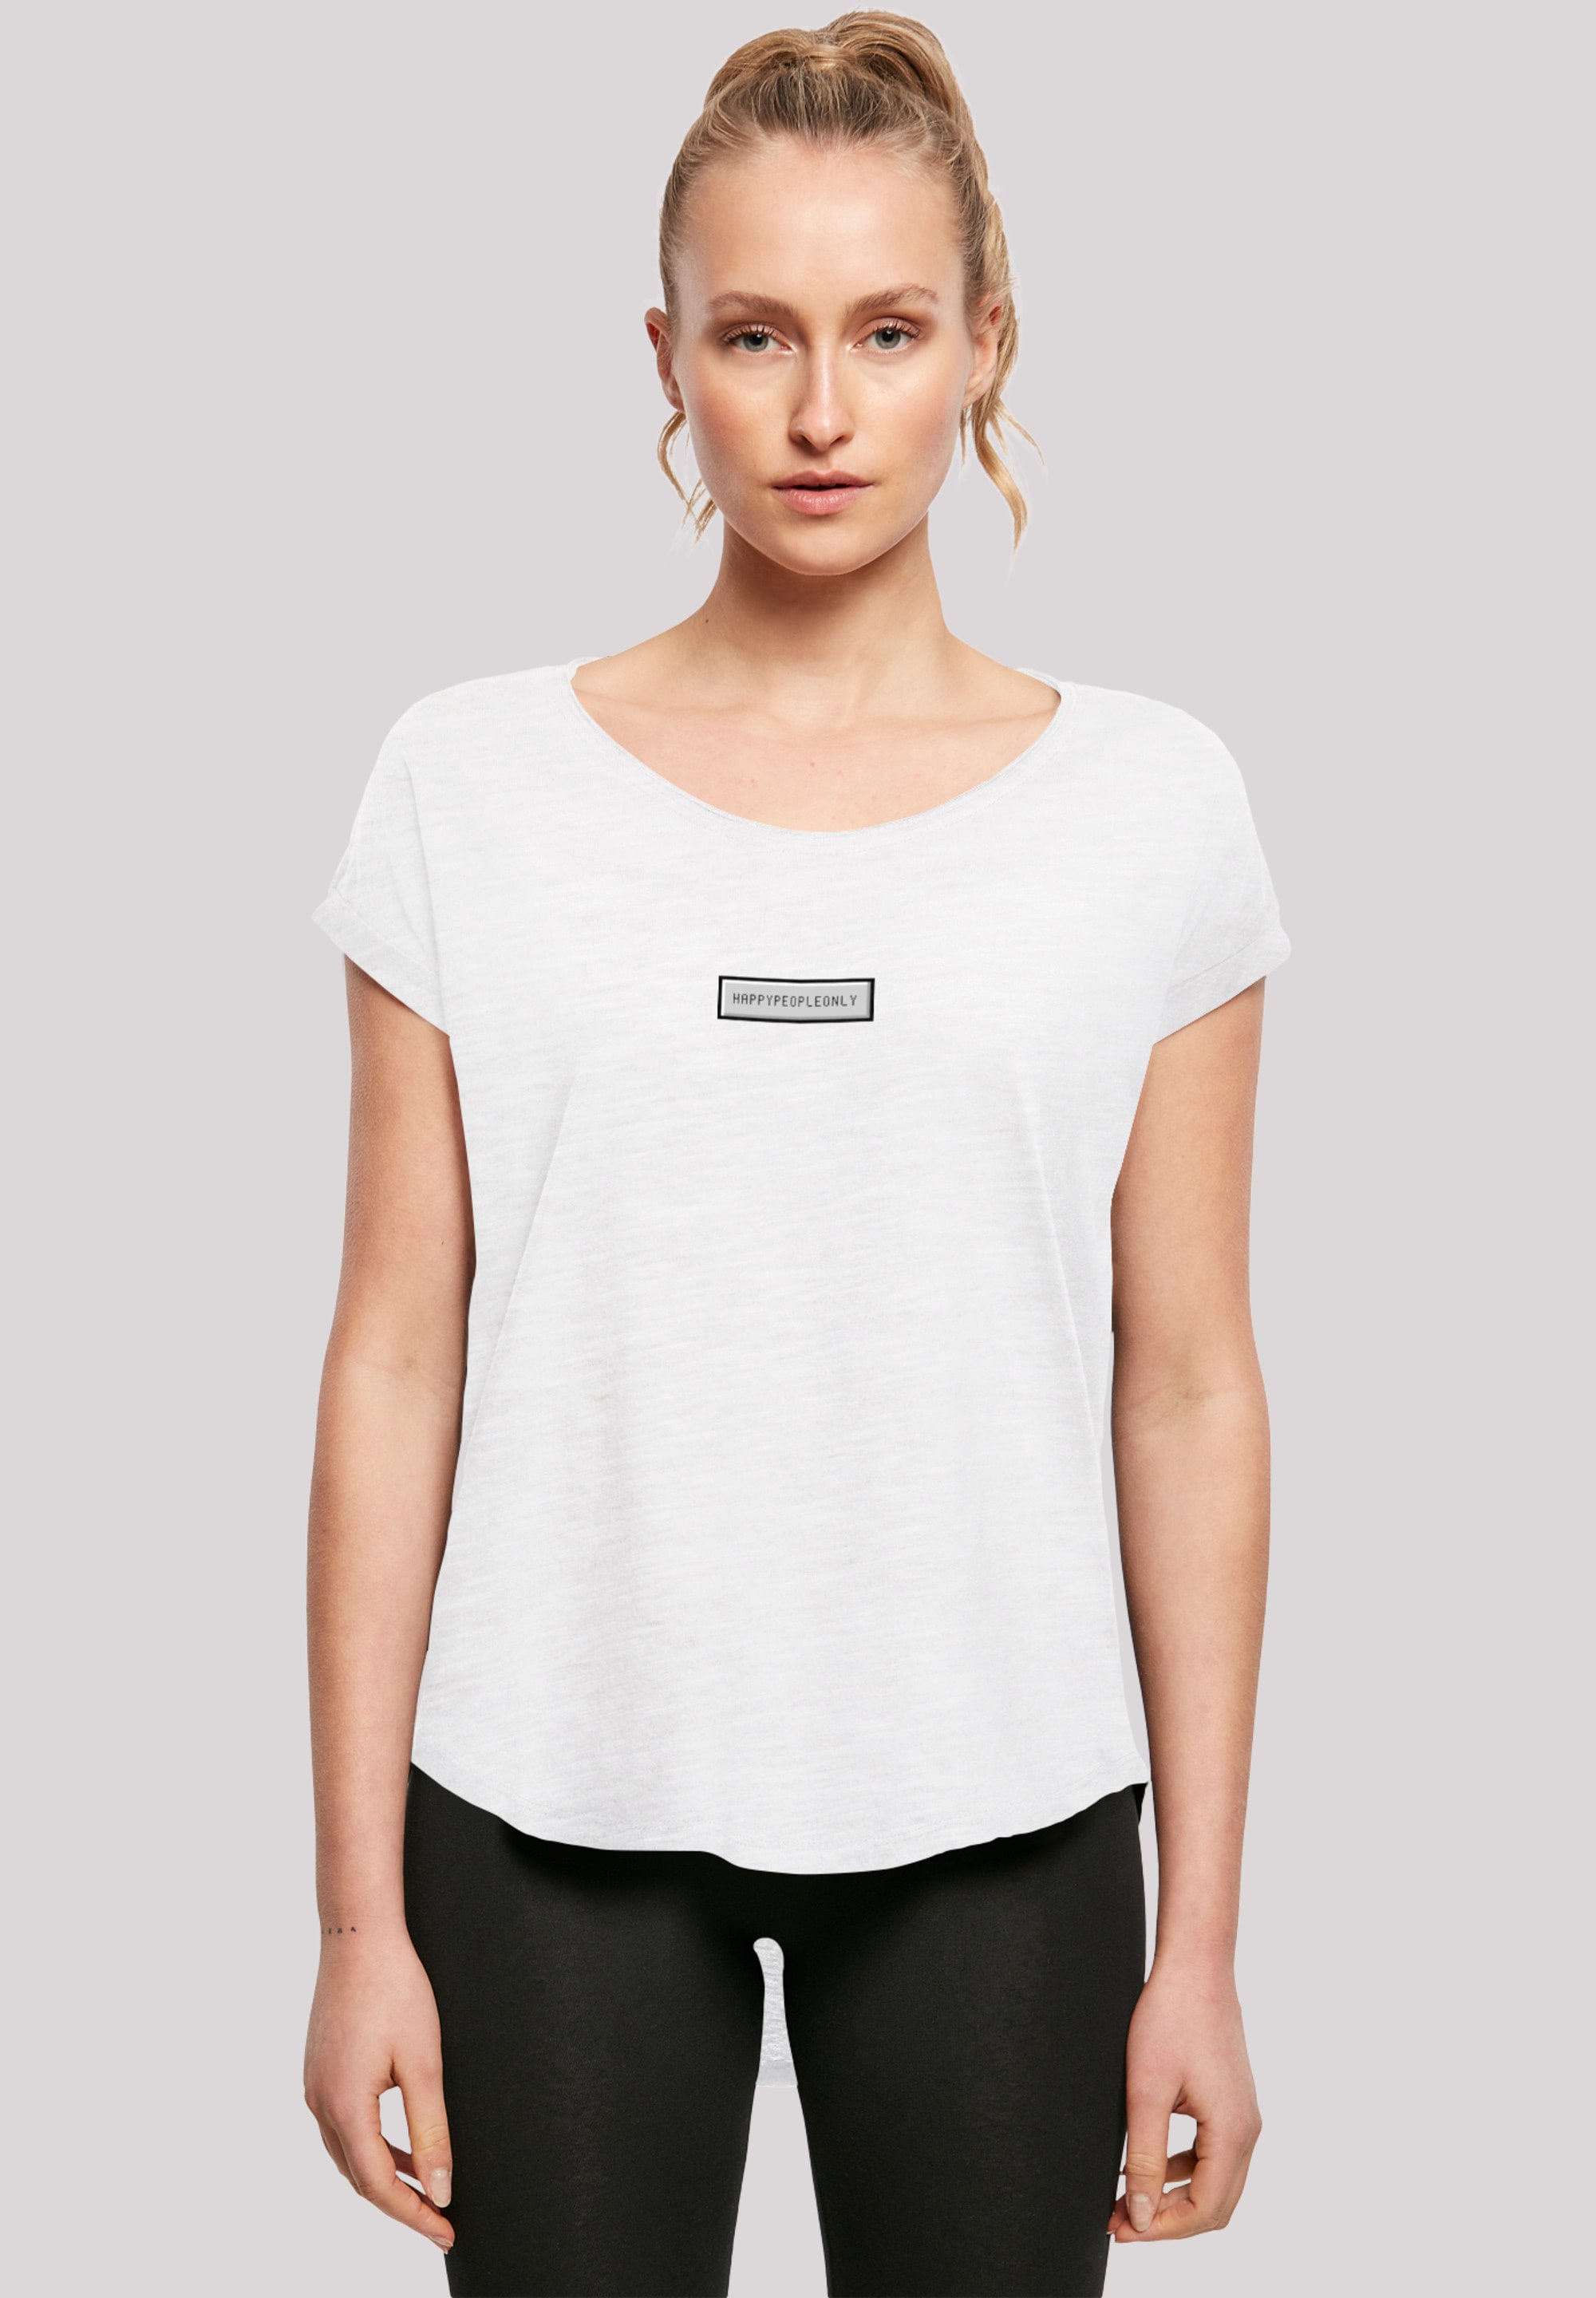 F4NT4STIC T-Shirt »F4NT4STIC Long Cut T-Shirt Happy Only«, Print People bestellen SIlvester Party